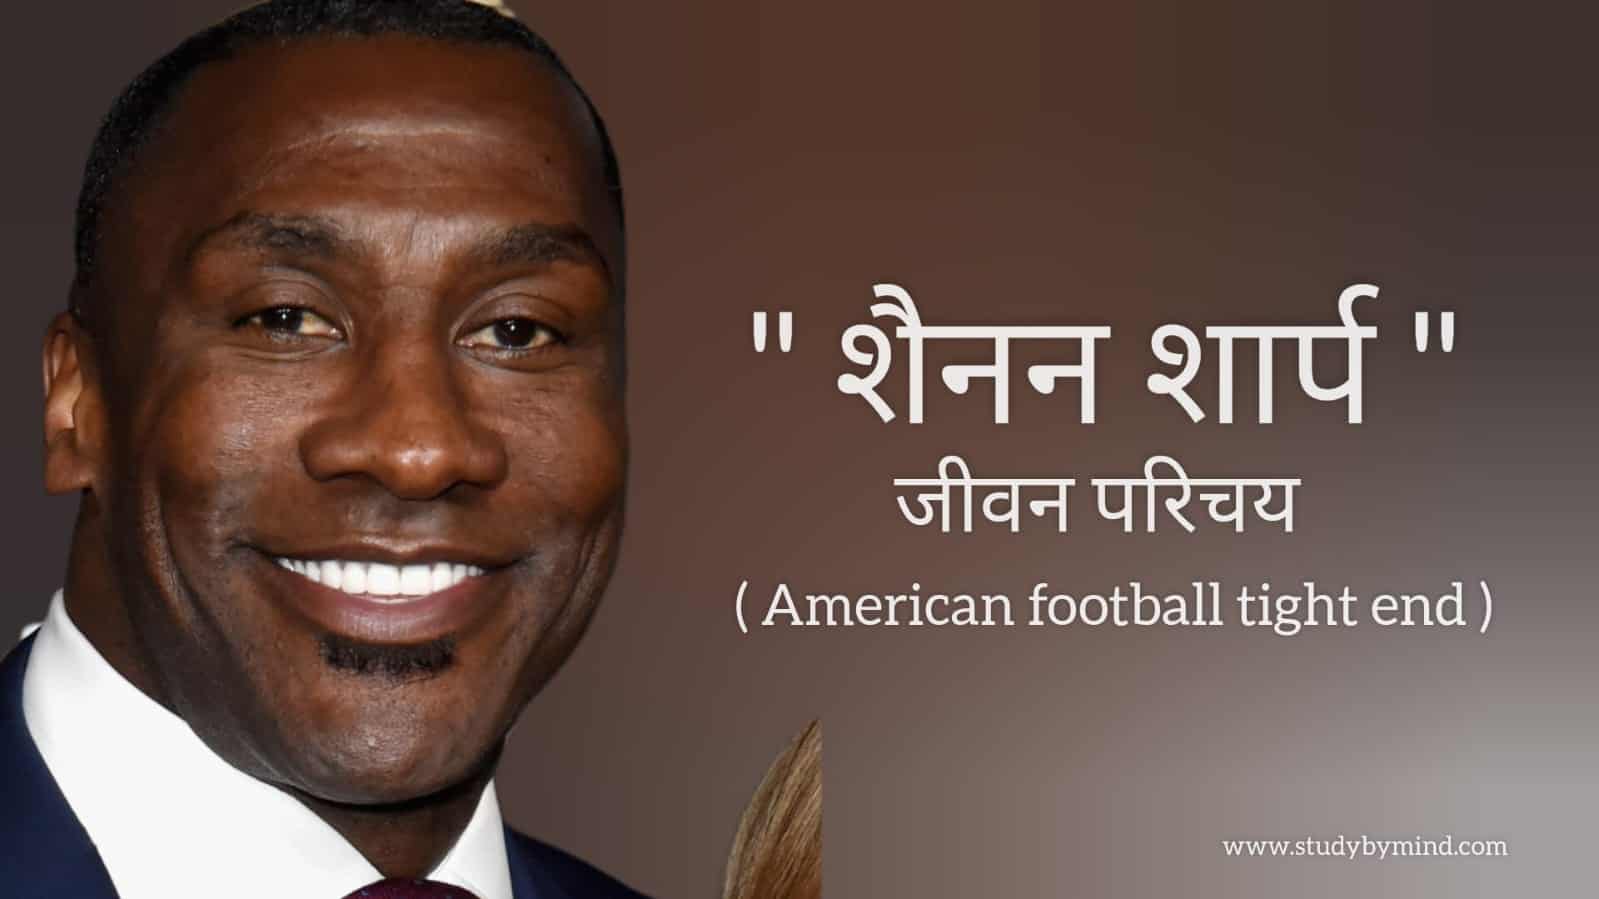 You are currently viewing शैनन शार्प जीवन परिचय Shannon sharpe biography in hindi (American football tight end)